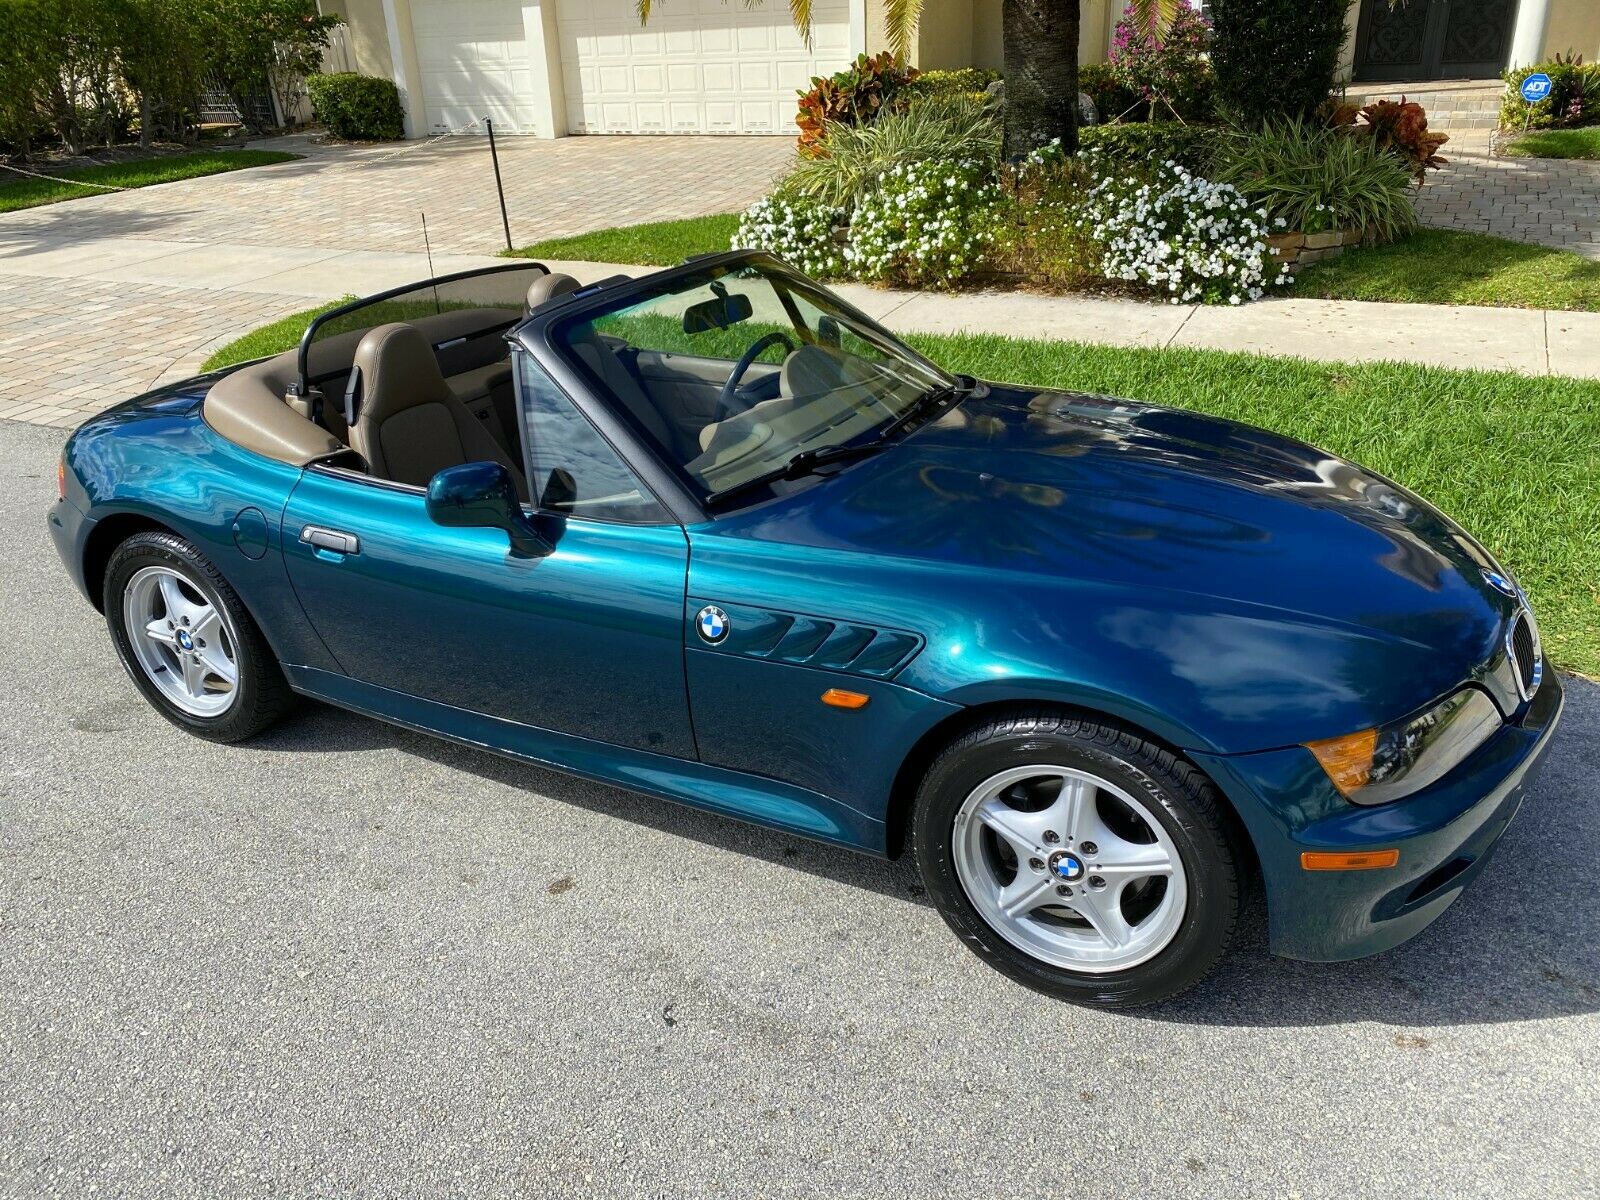 1997 Bmw Z3 Roadster! One Owner! 68k Miles! Heated Seats! Rare